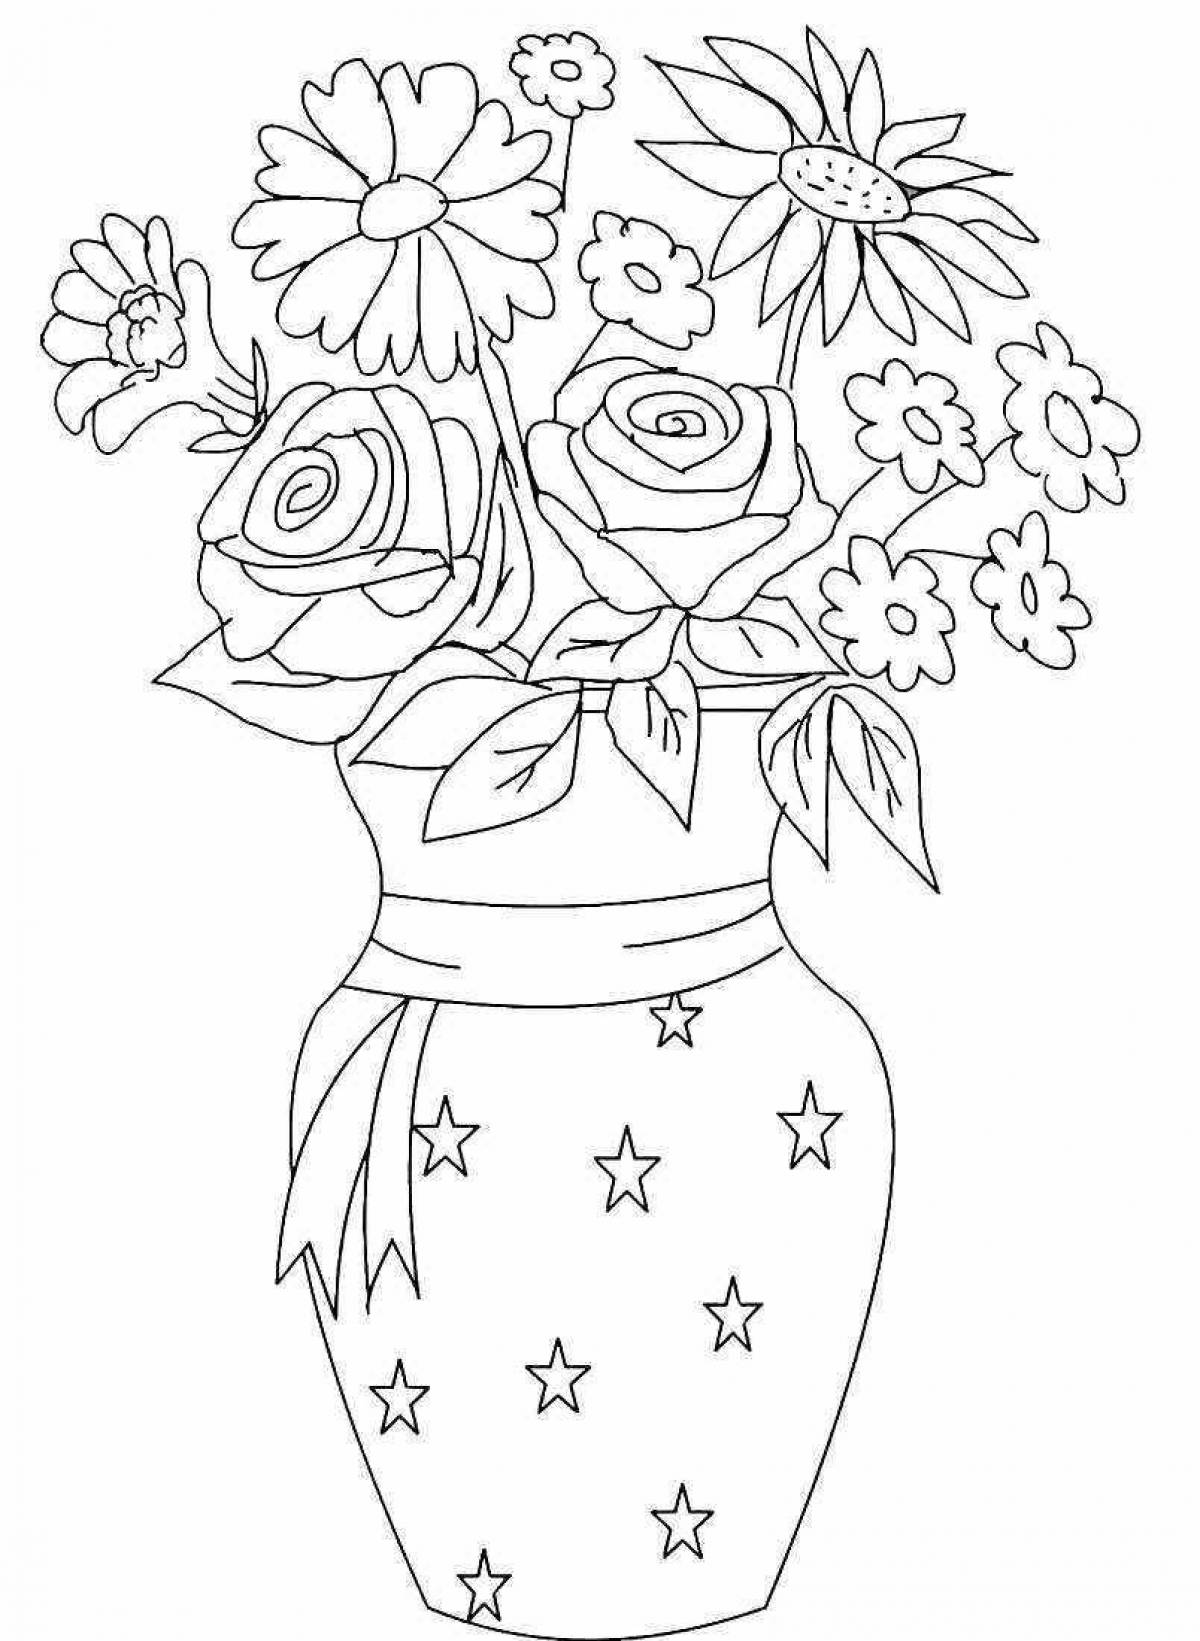 Brilliant bouquet of flowers in a vase coloring book